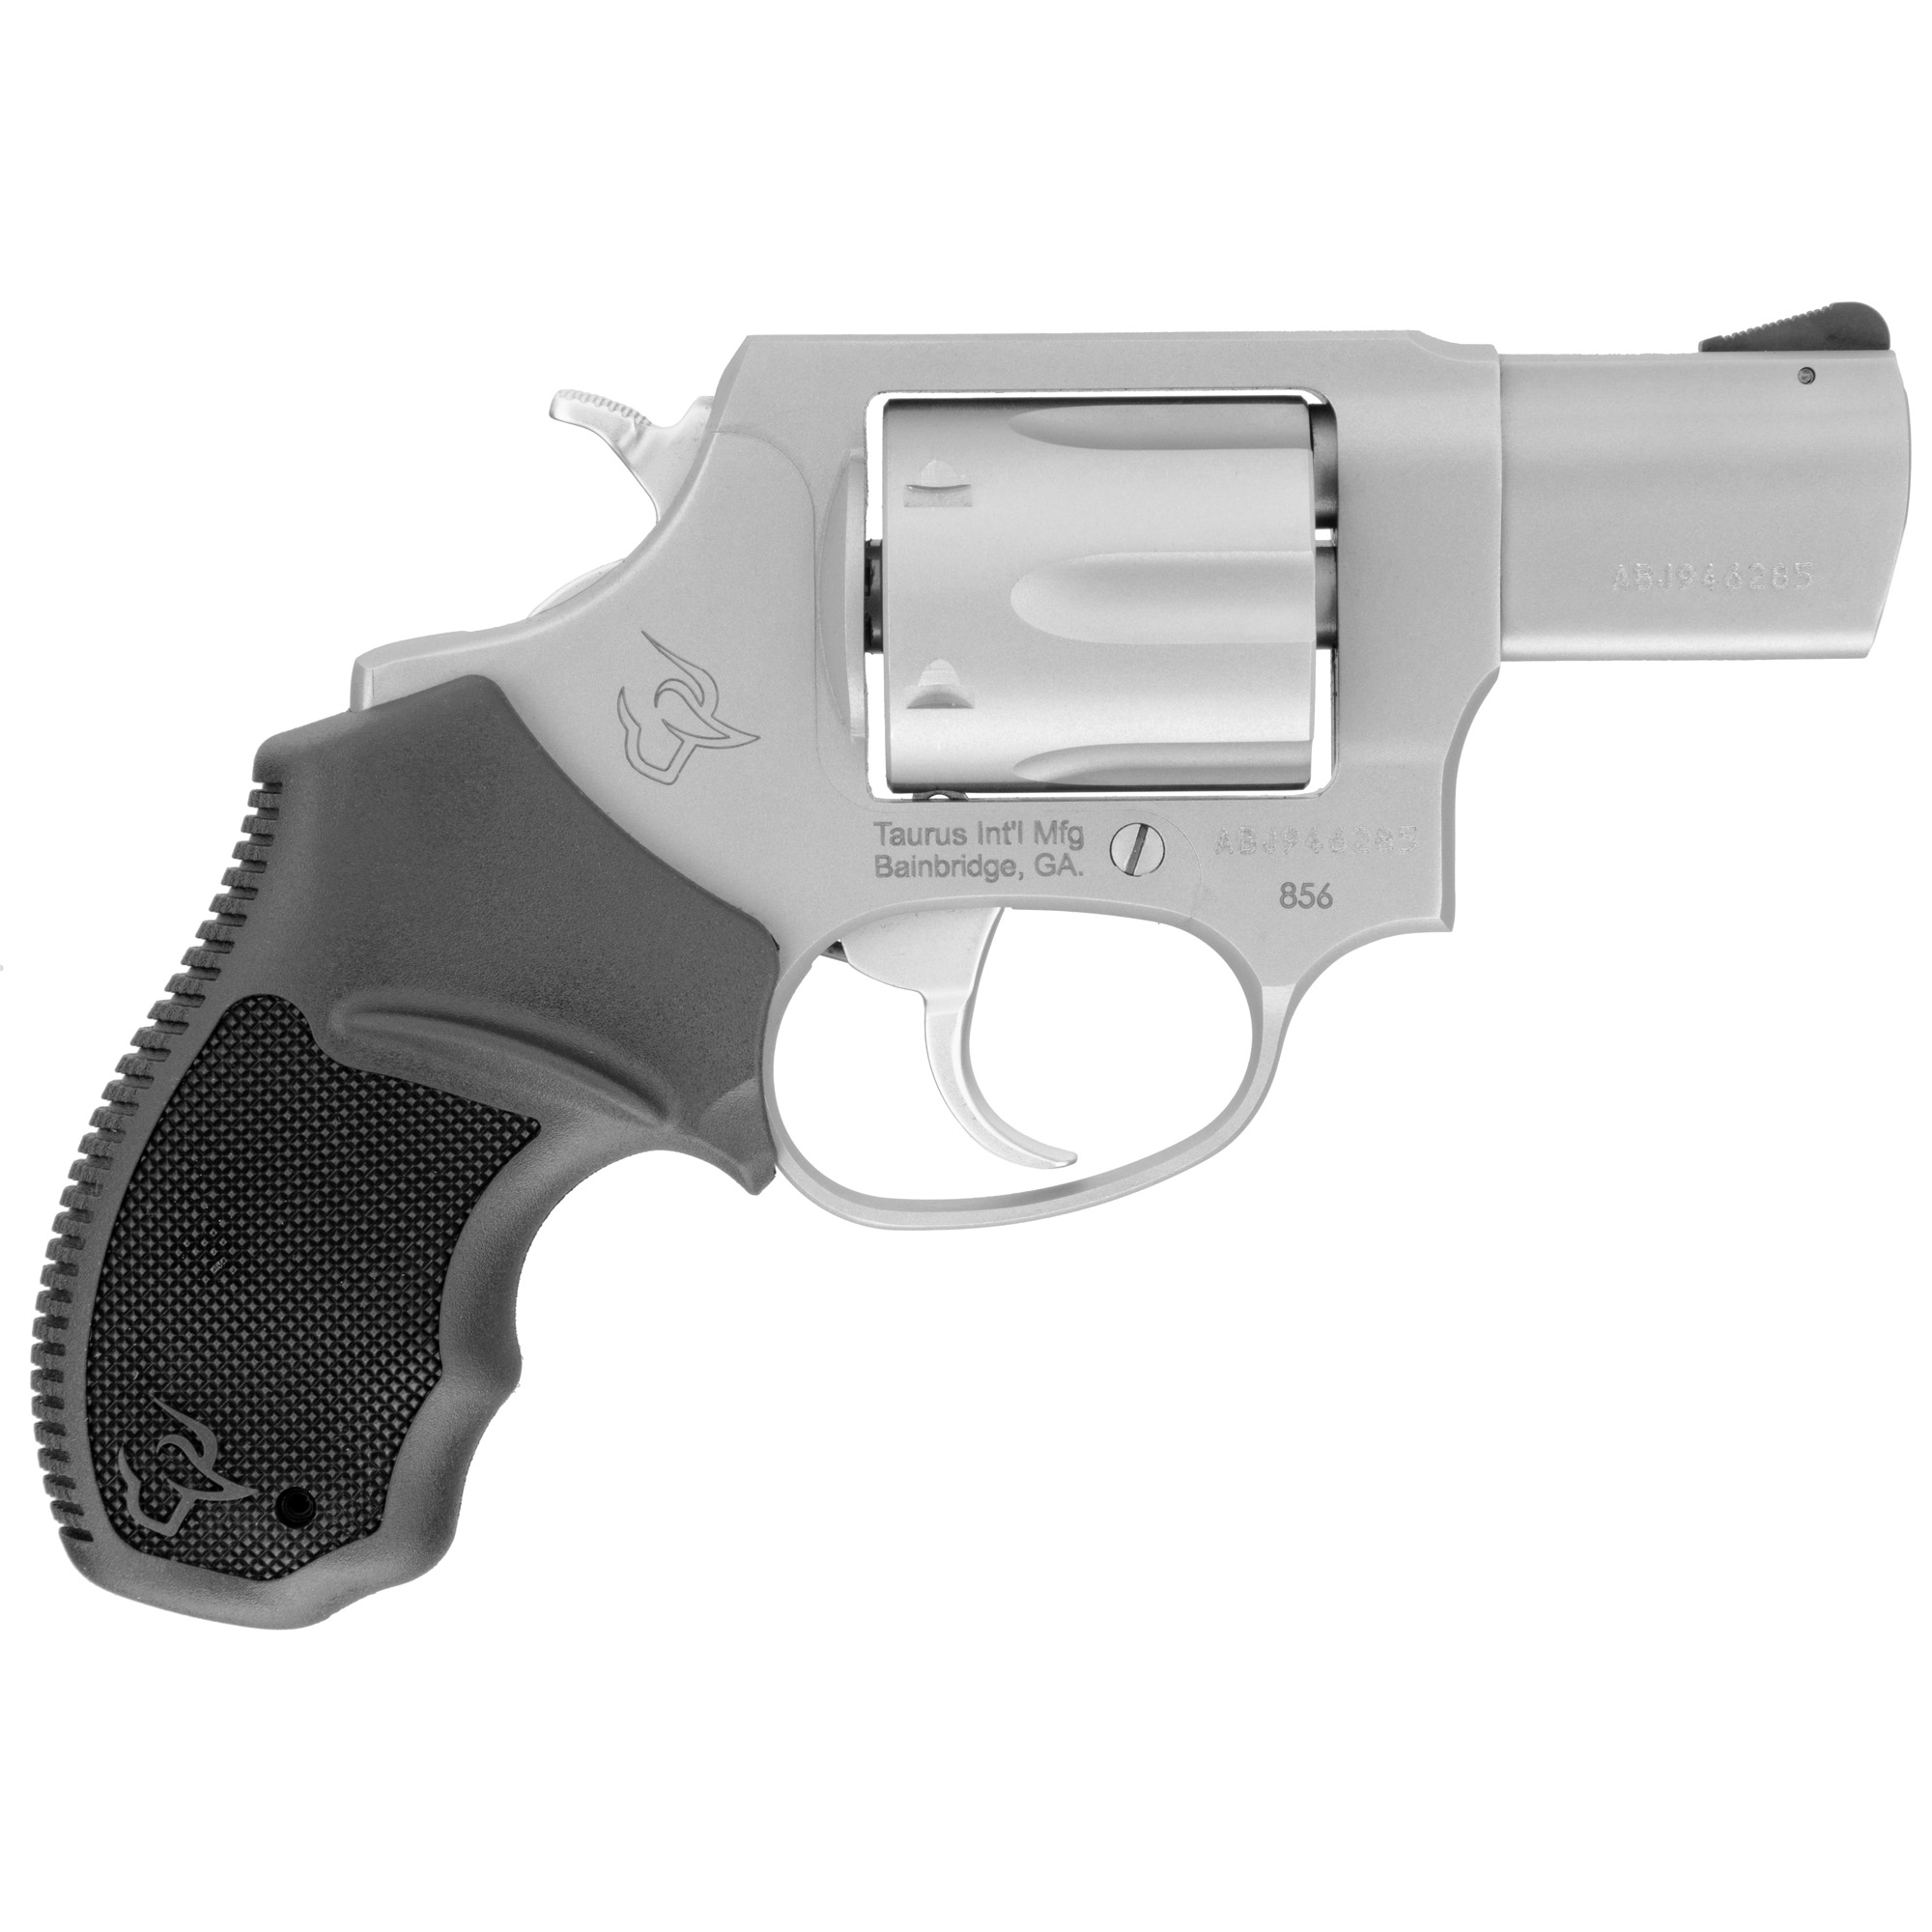 Taurus, Model 856CH, Double Action, Metal Frame Revolver, Small Frame, 38 Special, 2" Barrel, Stainless Steel, Matte Finish, Silver, Rubber Grips, Fixed Sights, 6 Rounds